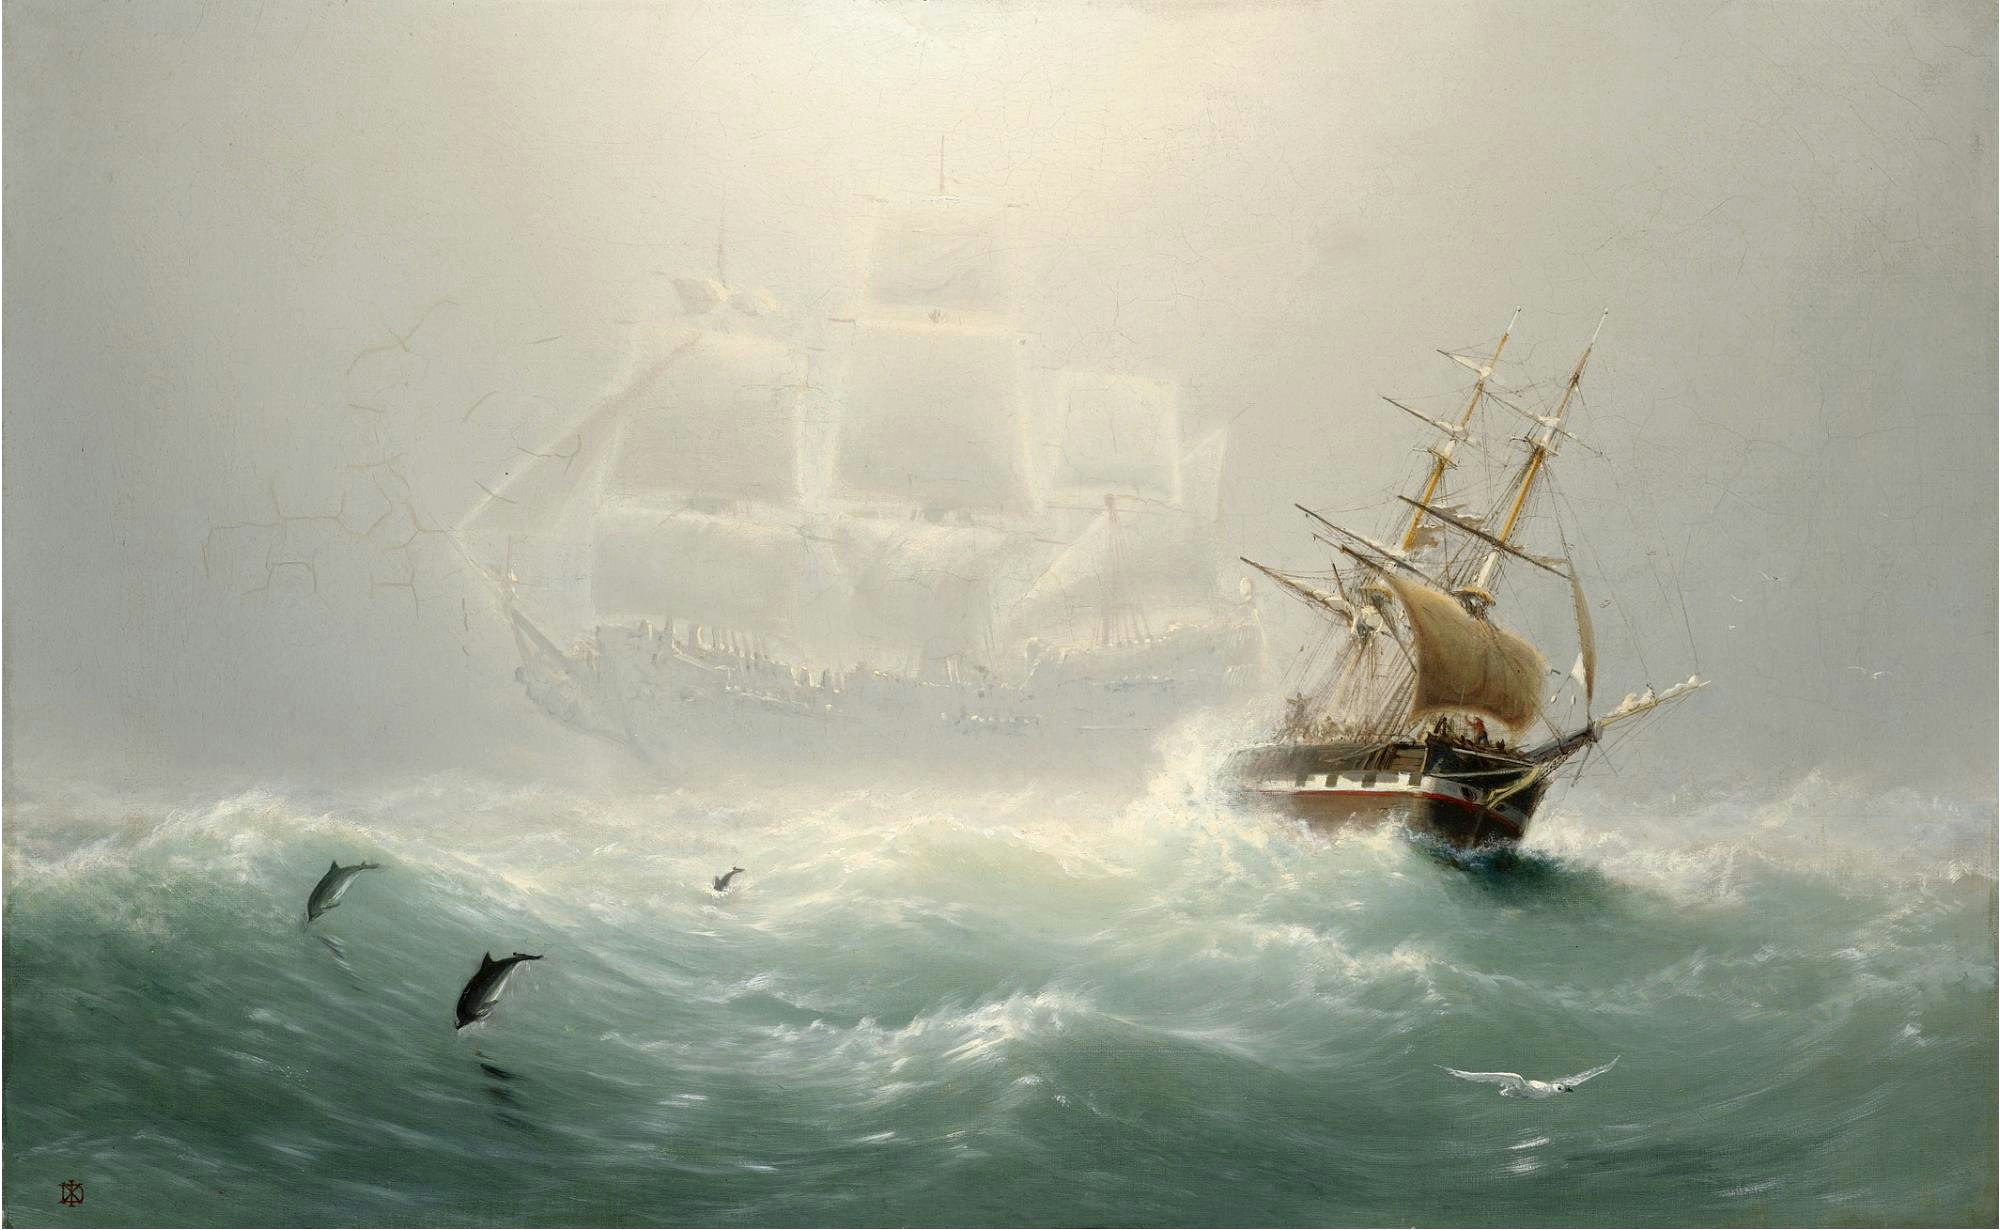 © Charles Temple, The Flying Dutchman